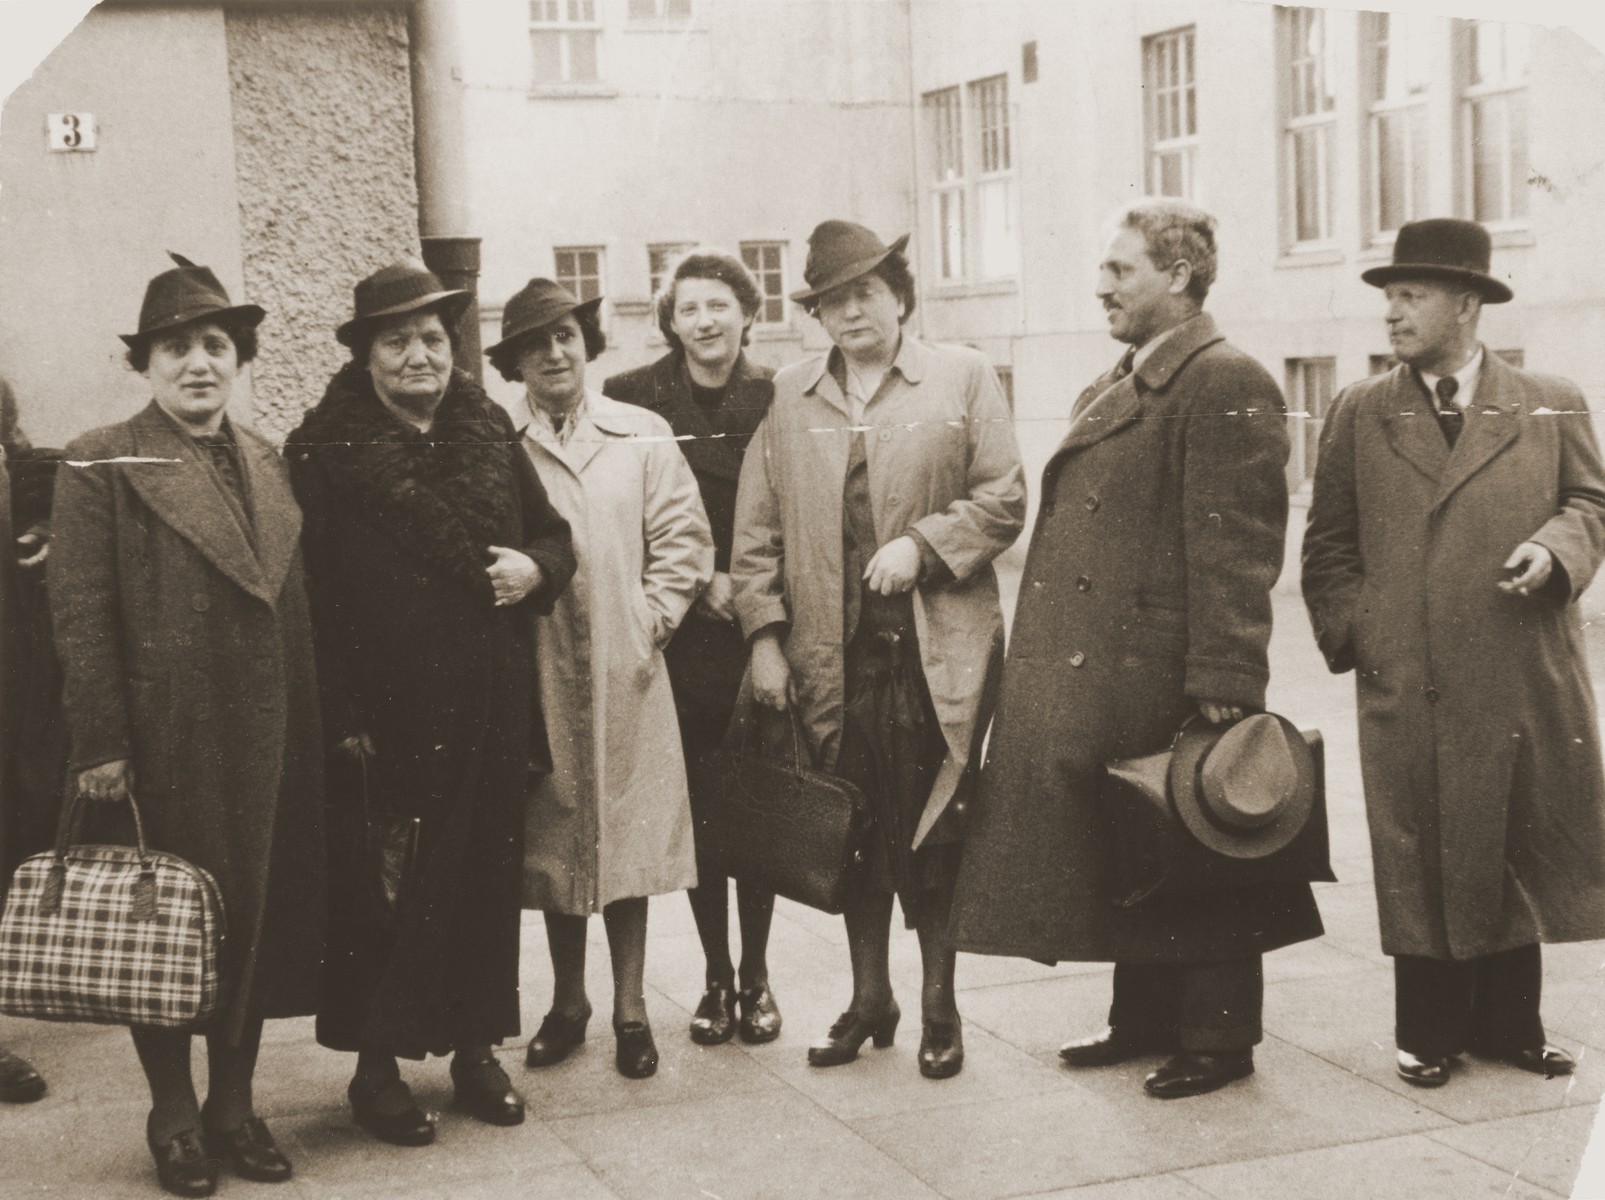 The Penner family gathers in Bremen to bid farewell to Chaya Penner (mother of David Penner) before she sails to the United States. 

Pictured from left to right are: Dora (Penner) Rosenmund; Chaya, Janka, unknown and David Penner.